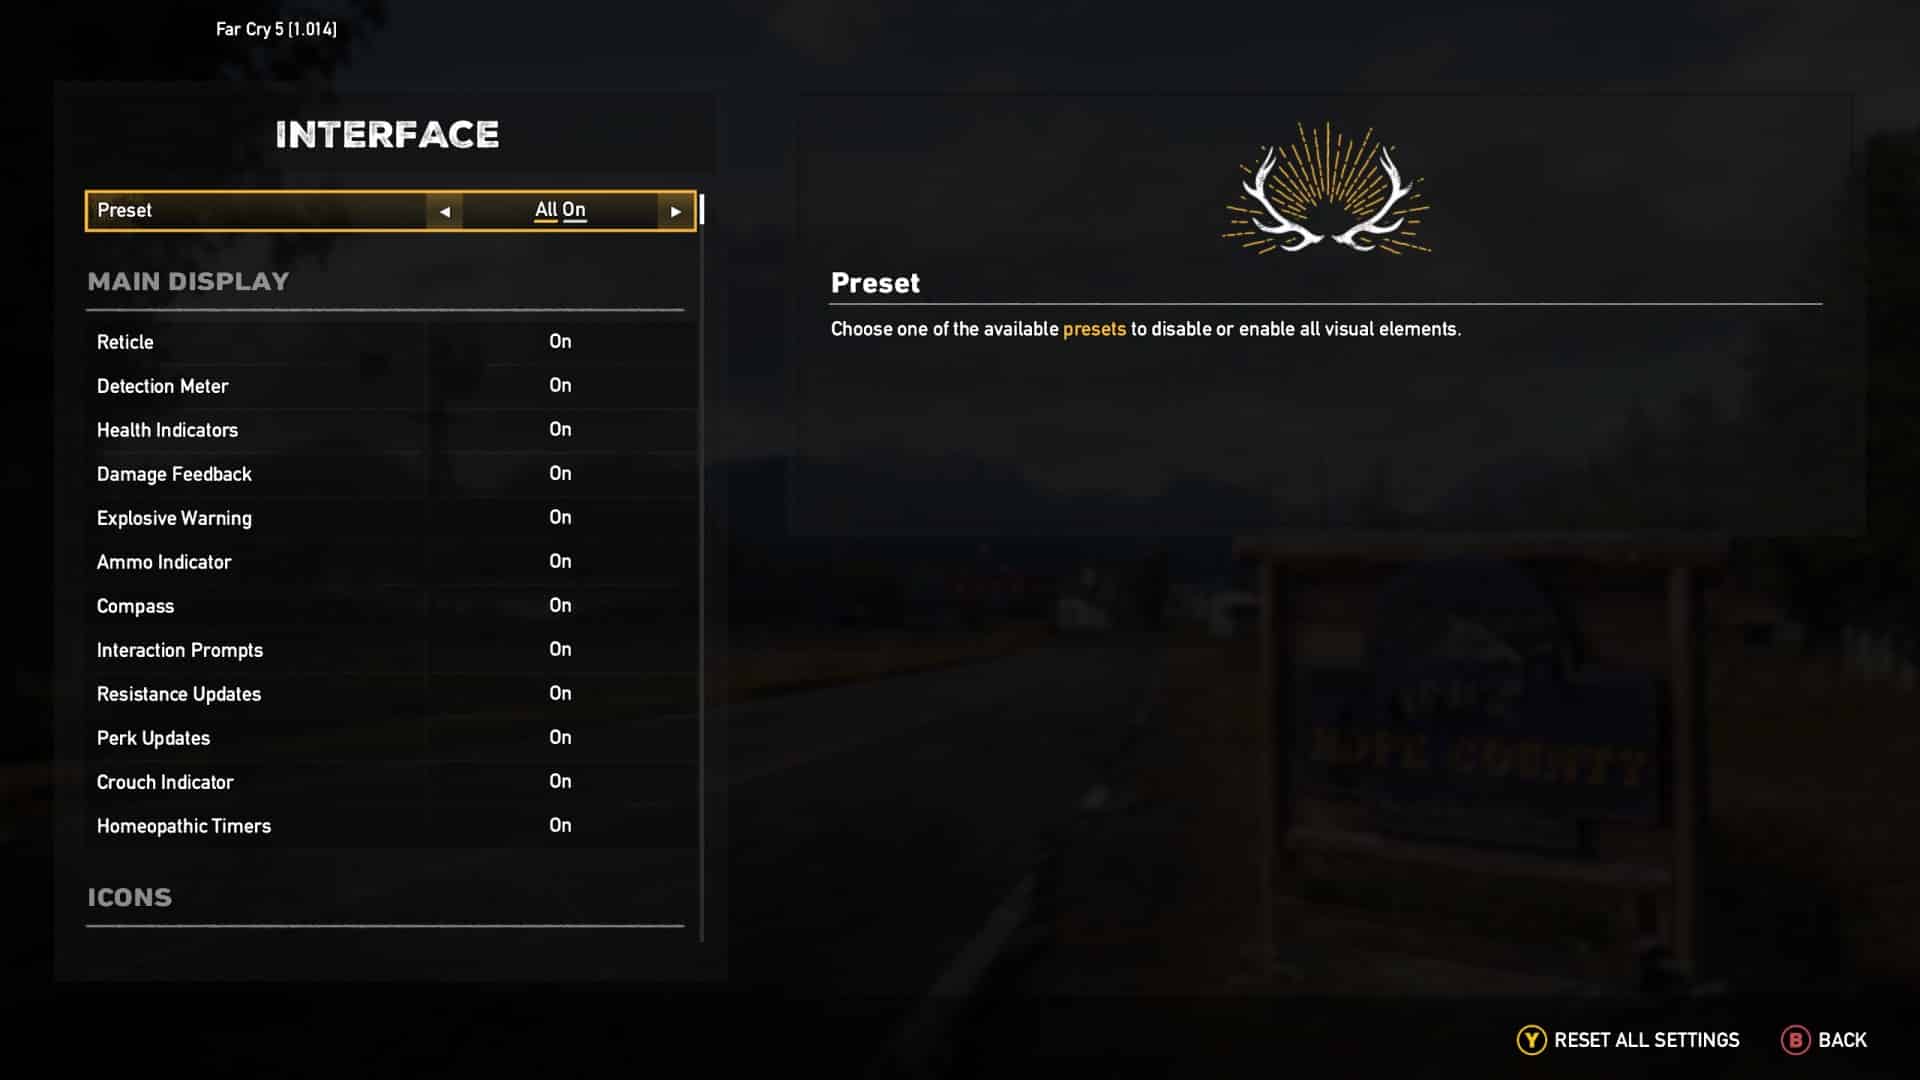 (In Far Cry 5, everything from the main displays to individual icons can be turned on and off separately.)